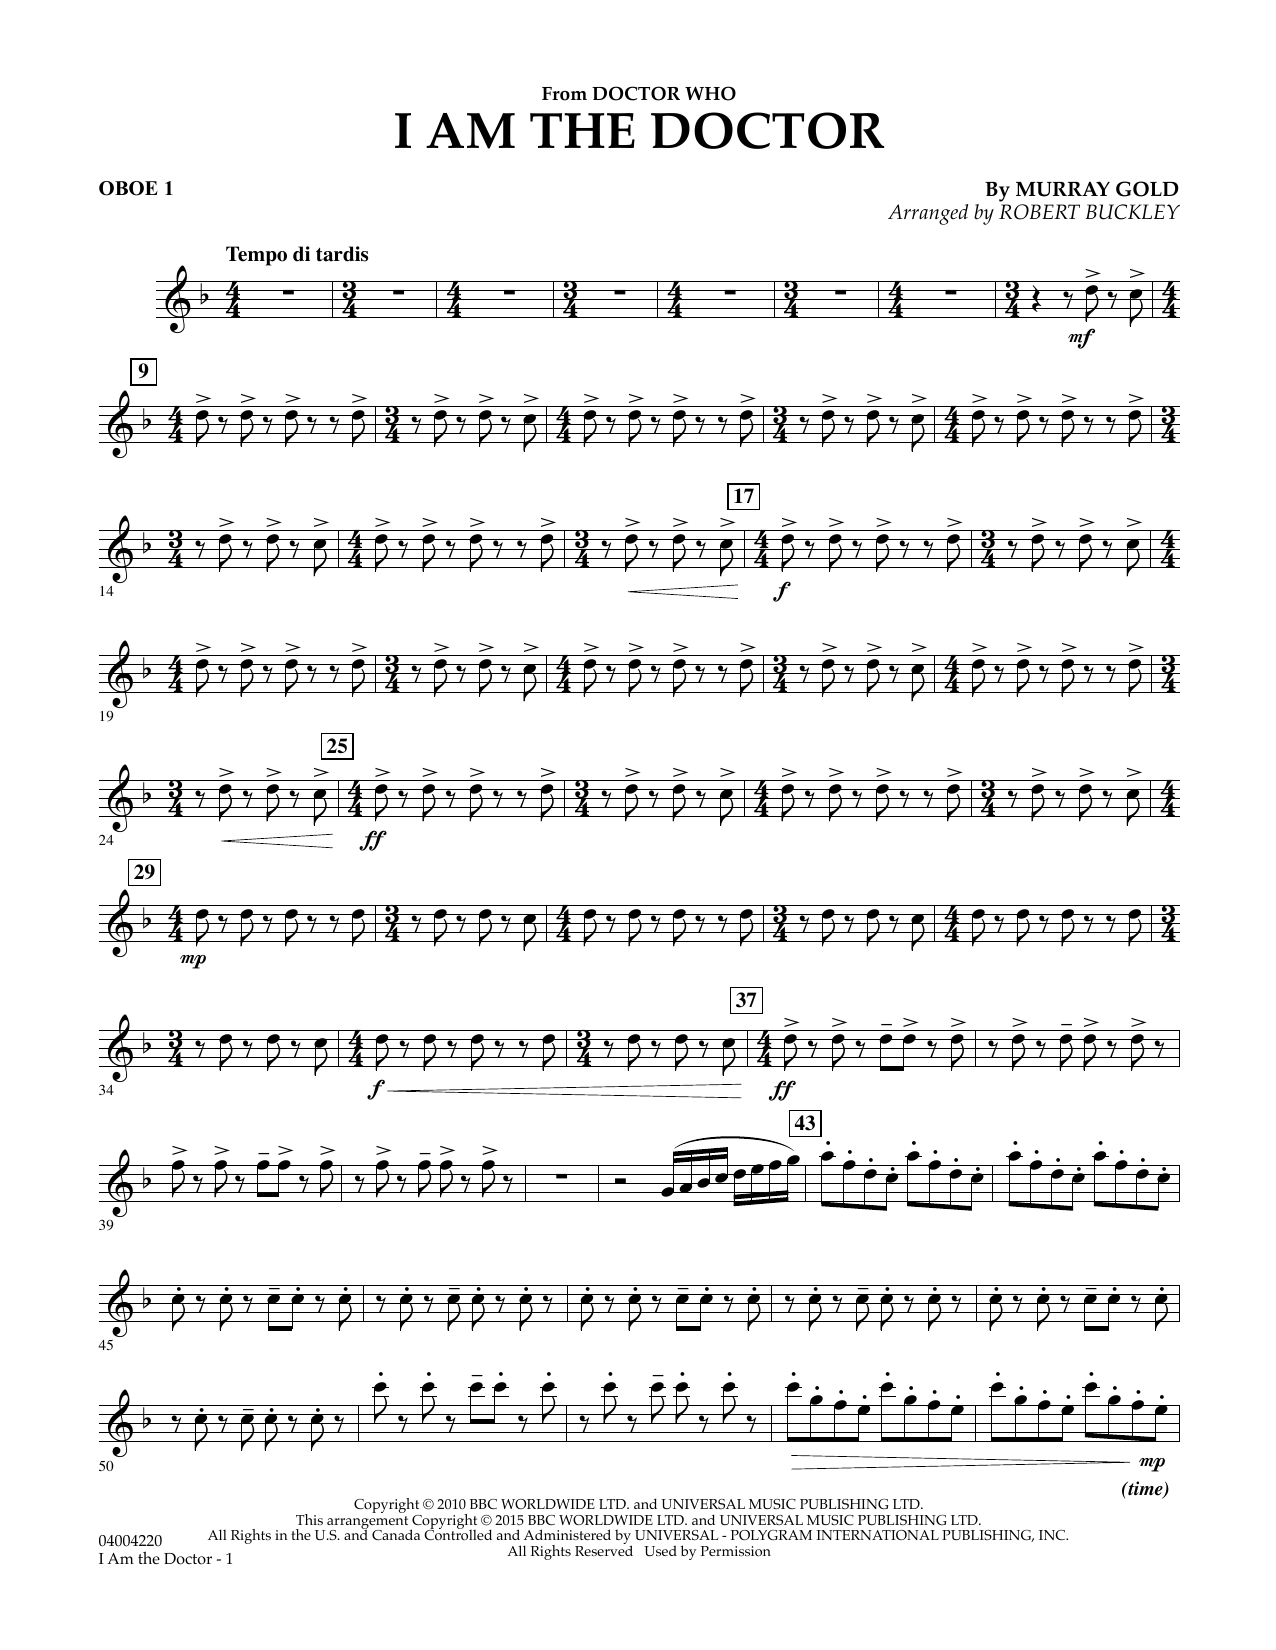 Robert Buckley I Am the Doctor (from Doctor Who) - Oboe 1 sheet music notes and chords. Download Printable PDF.